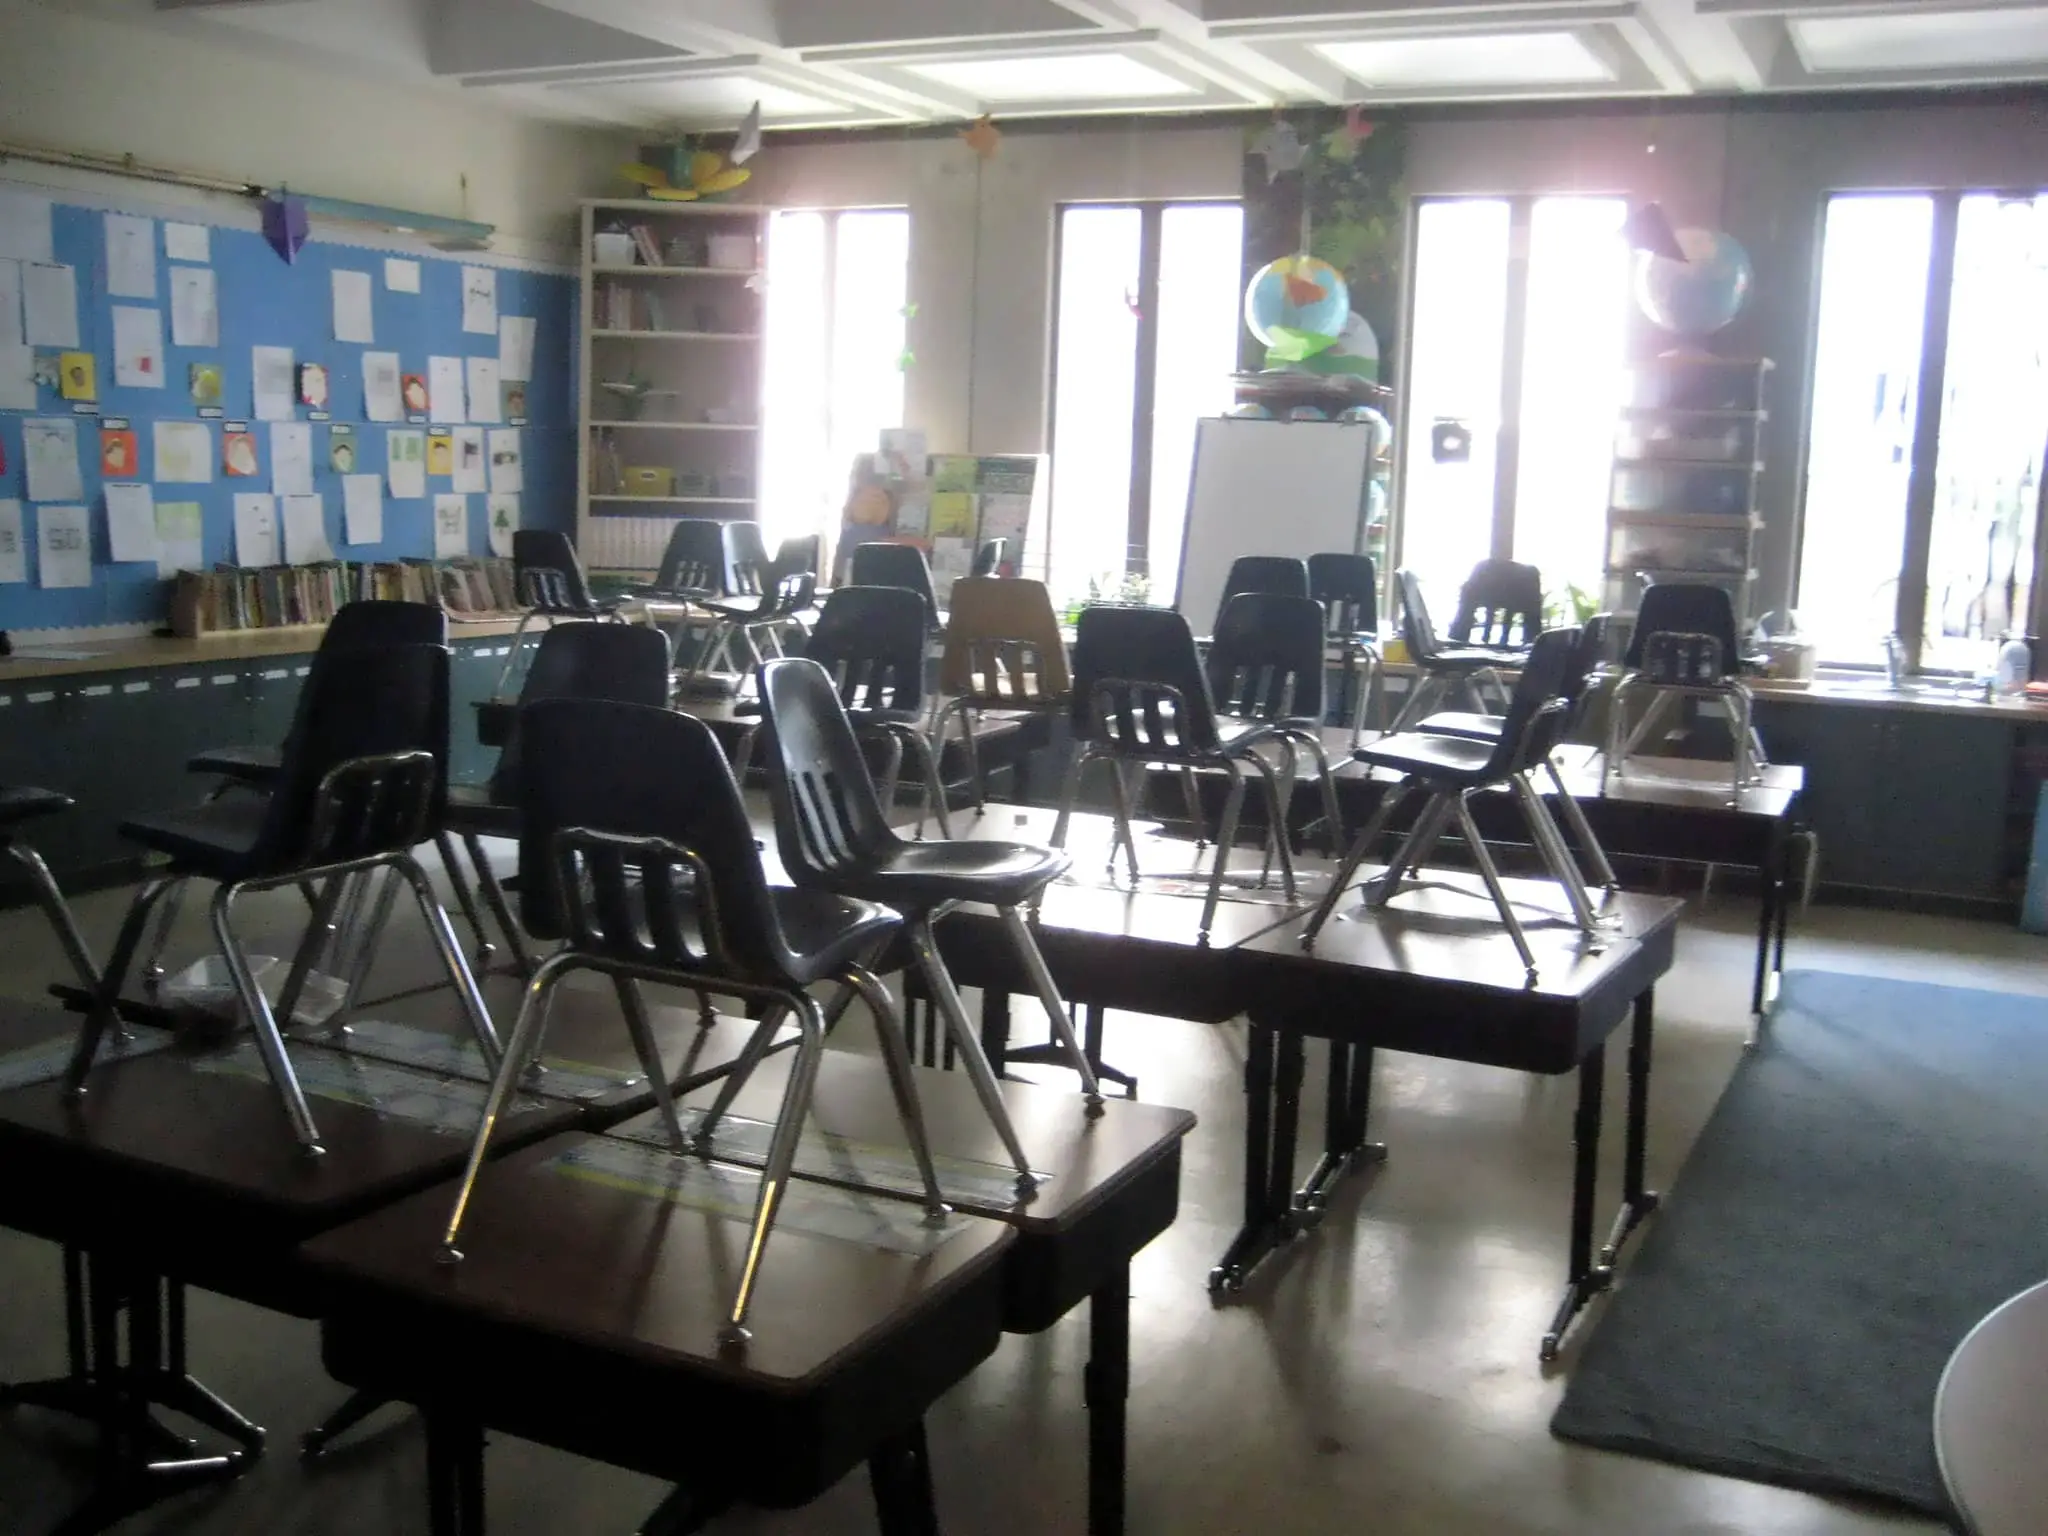 school classroom with chairs on desks